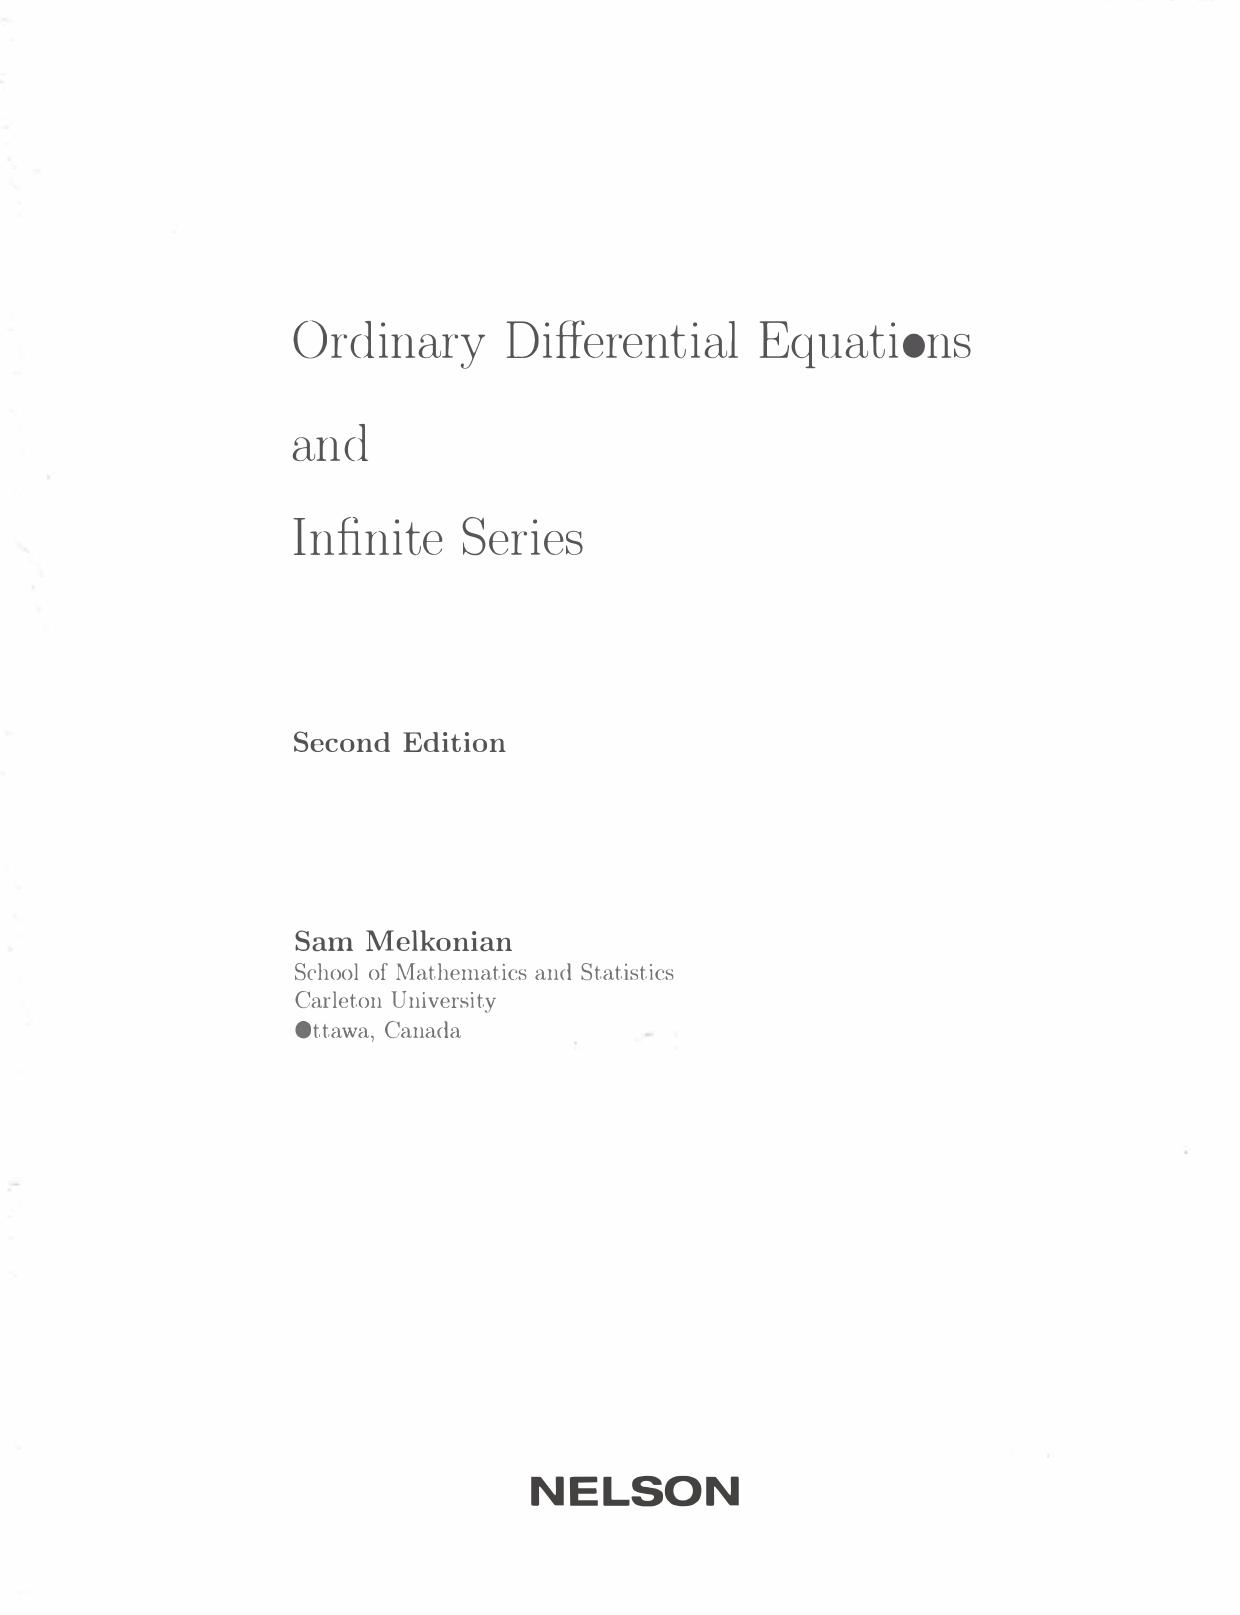 Ordinary Differential Equations and Infinite Series